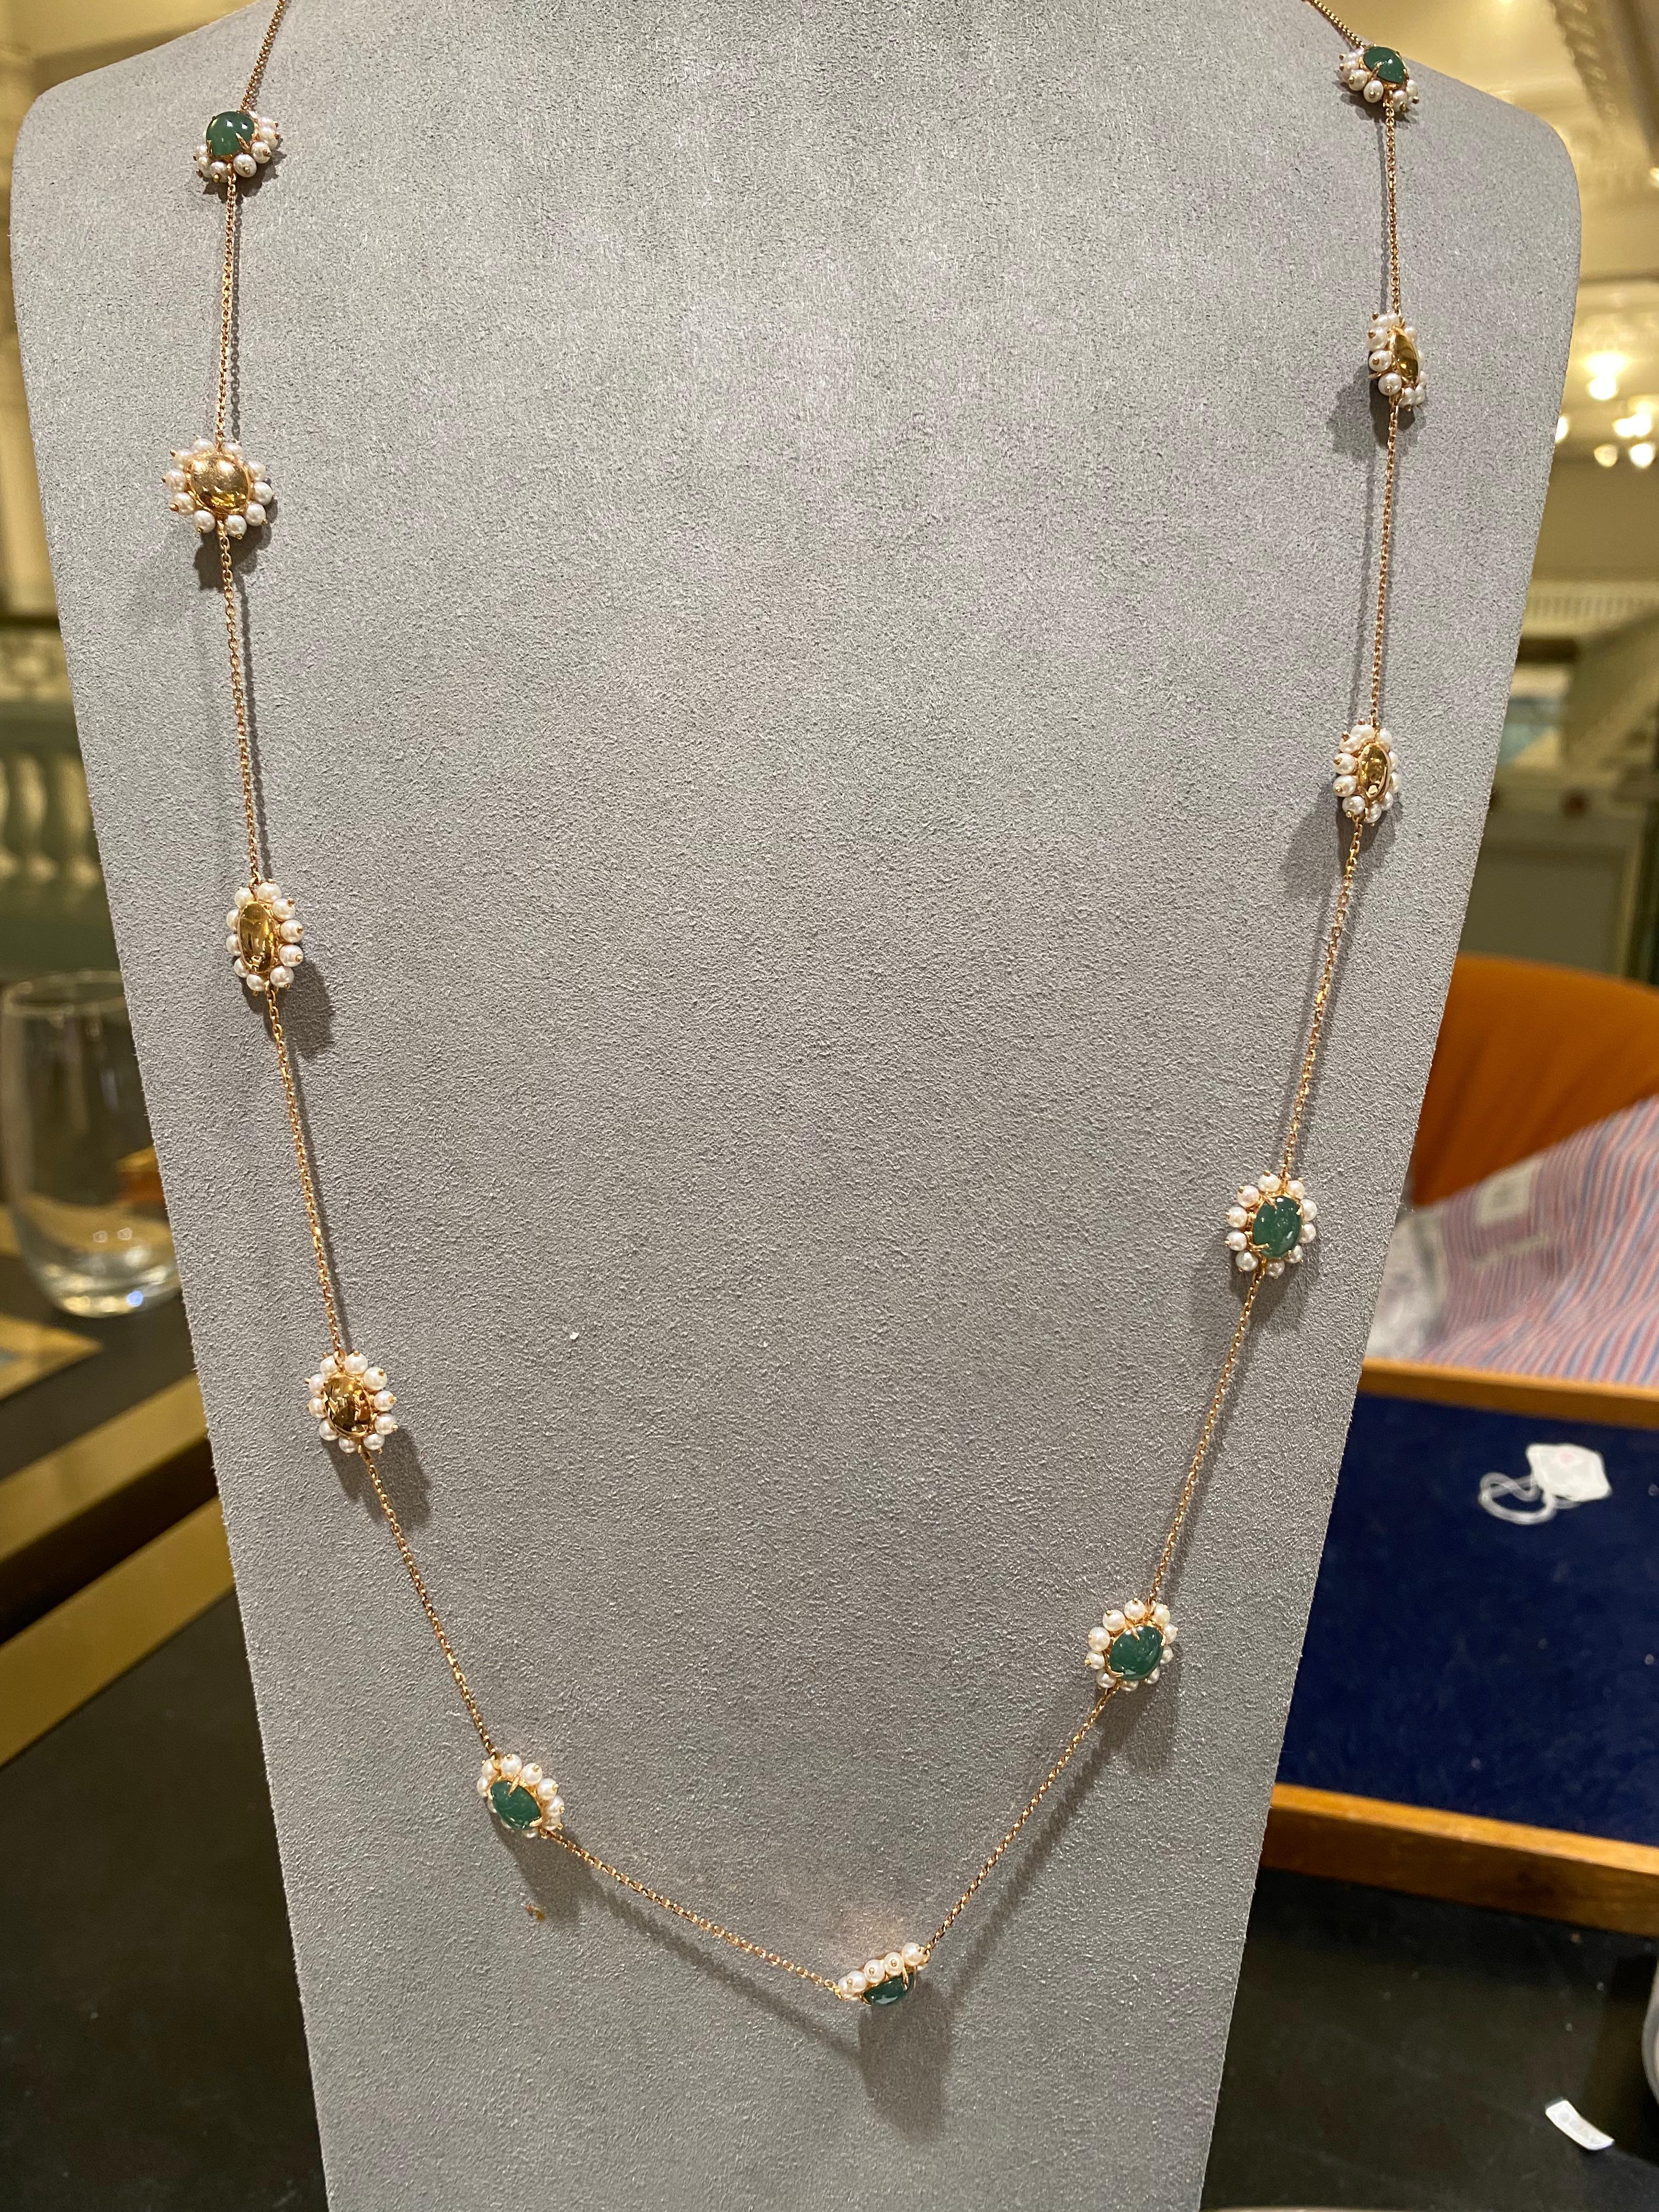 Type A Jadeite Necklace with seed pearls. It is a magnificent piece of Art as the diameter of the pearls is almost as same size as the drill, it takes a lot of hard work to finish this necklace. The design is aiming to avoid the flower motif